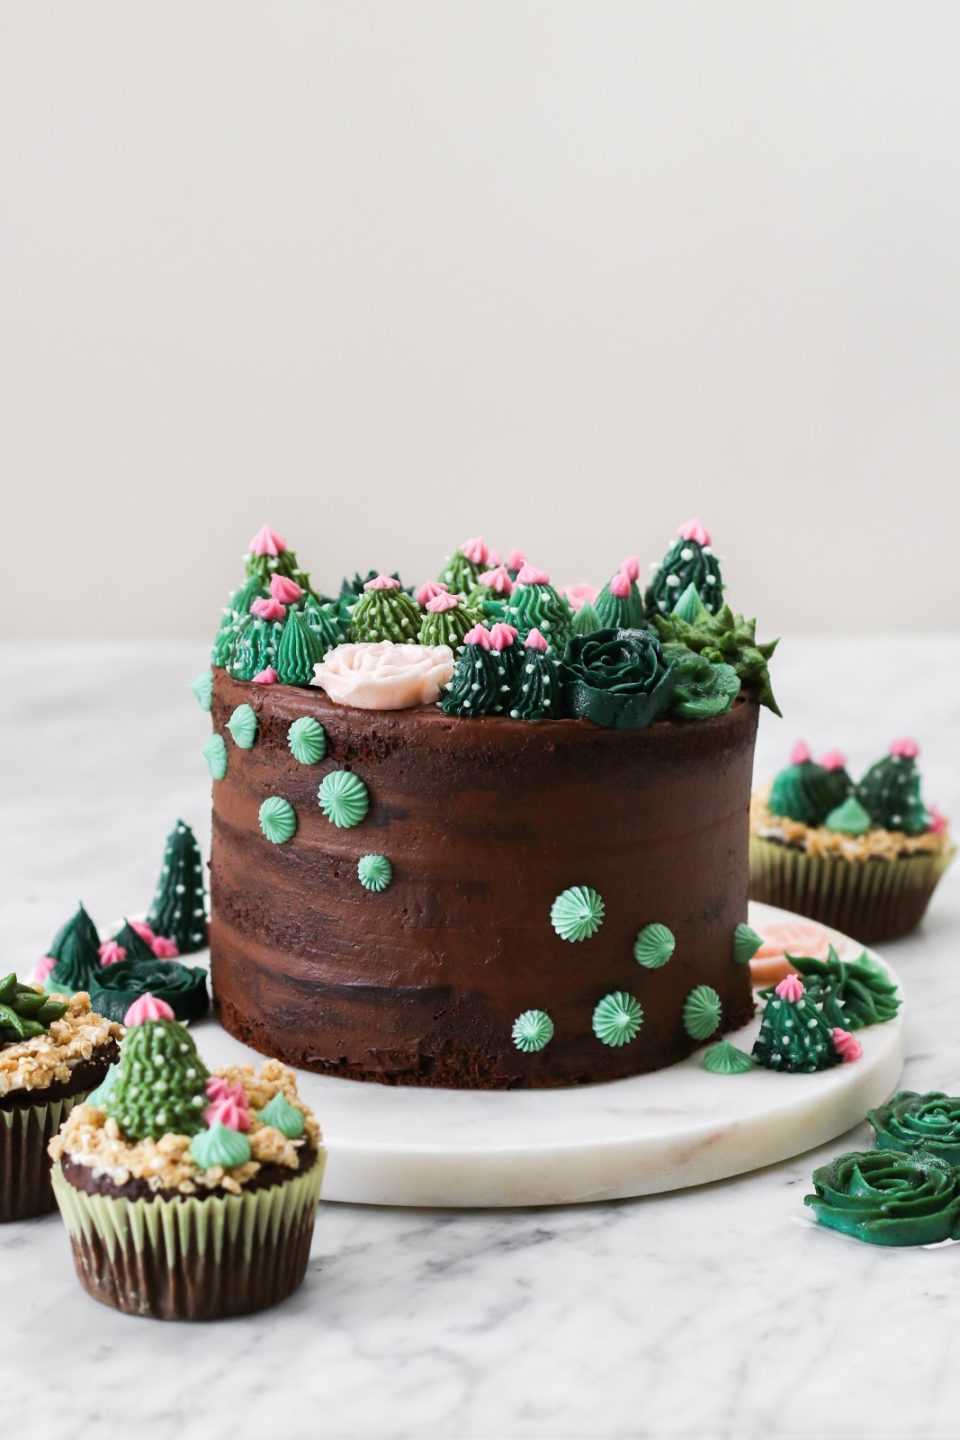 Succulent Naked Layer Cake - Classy Girl Cupcakes